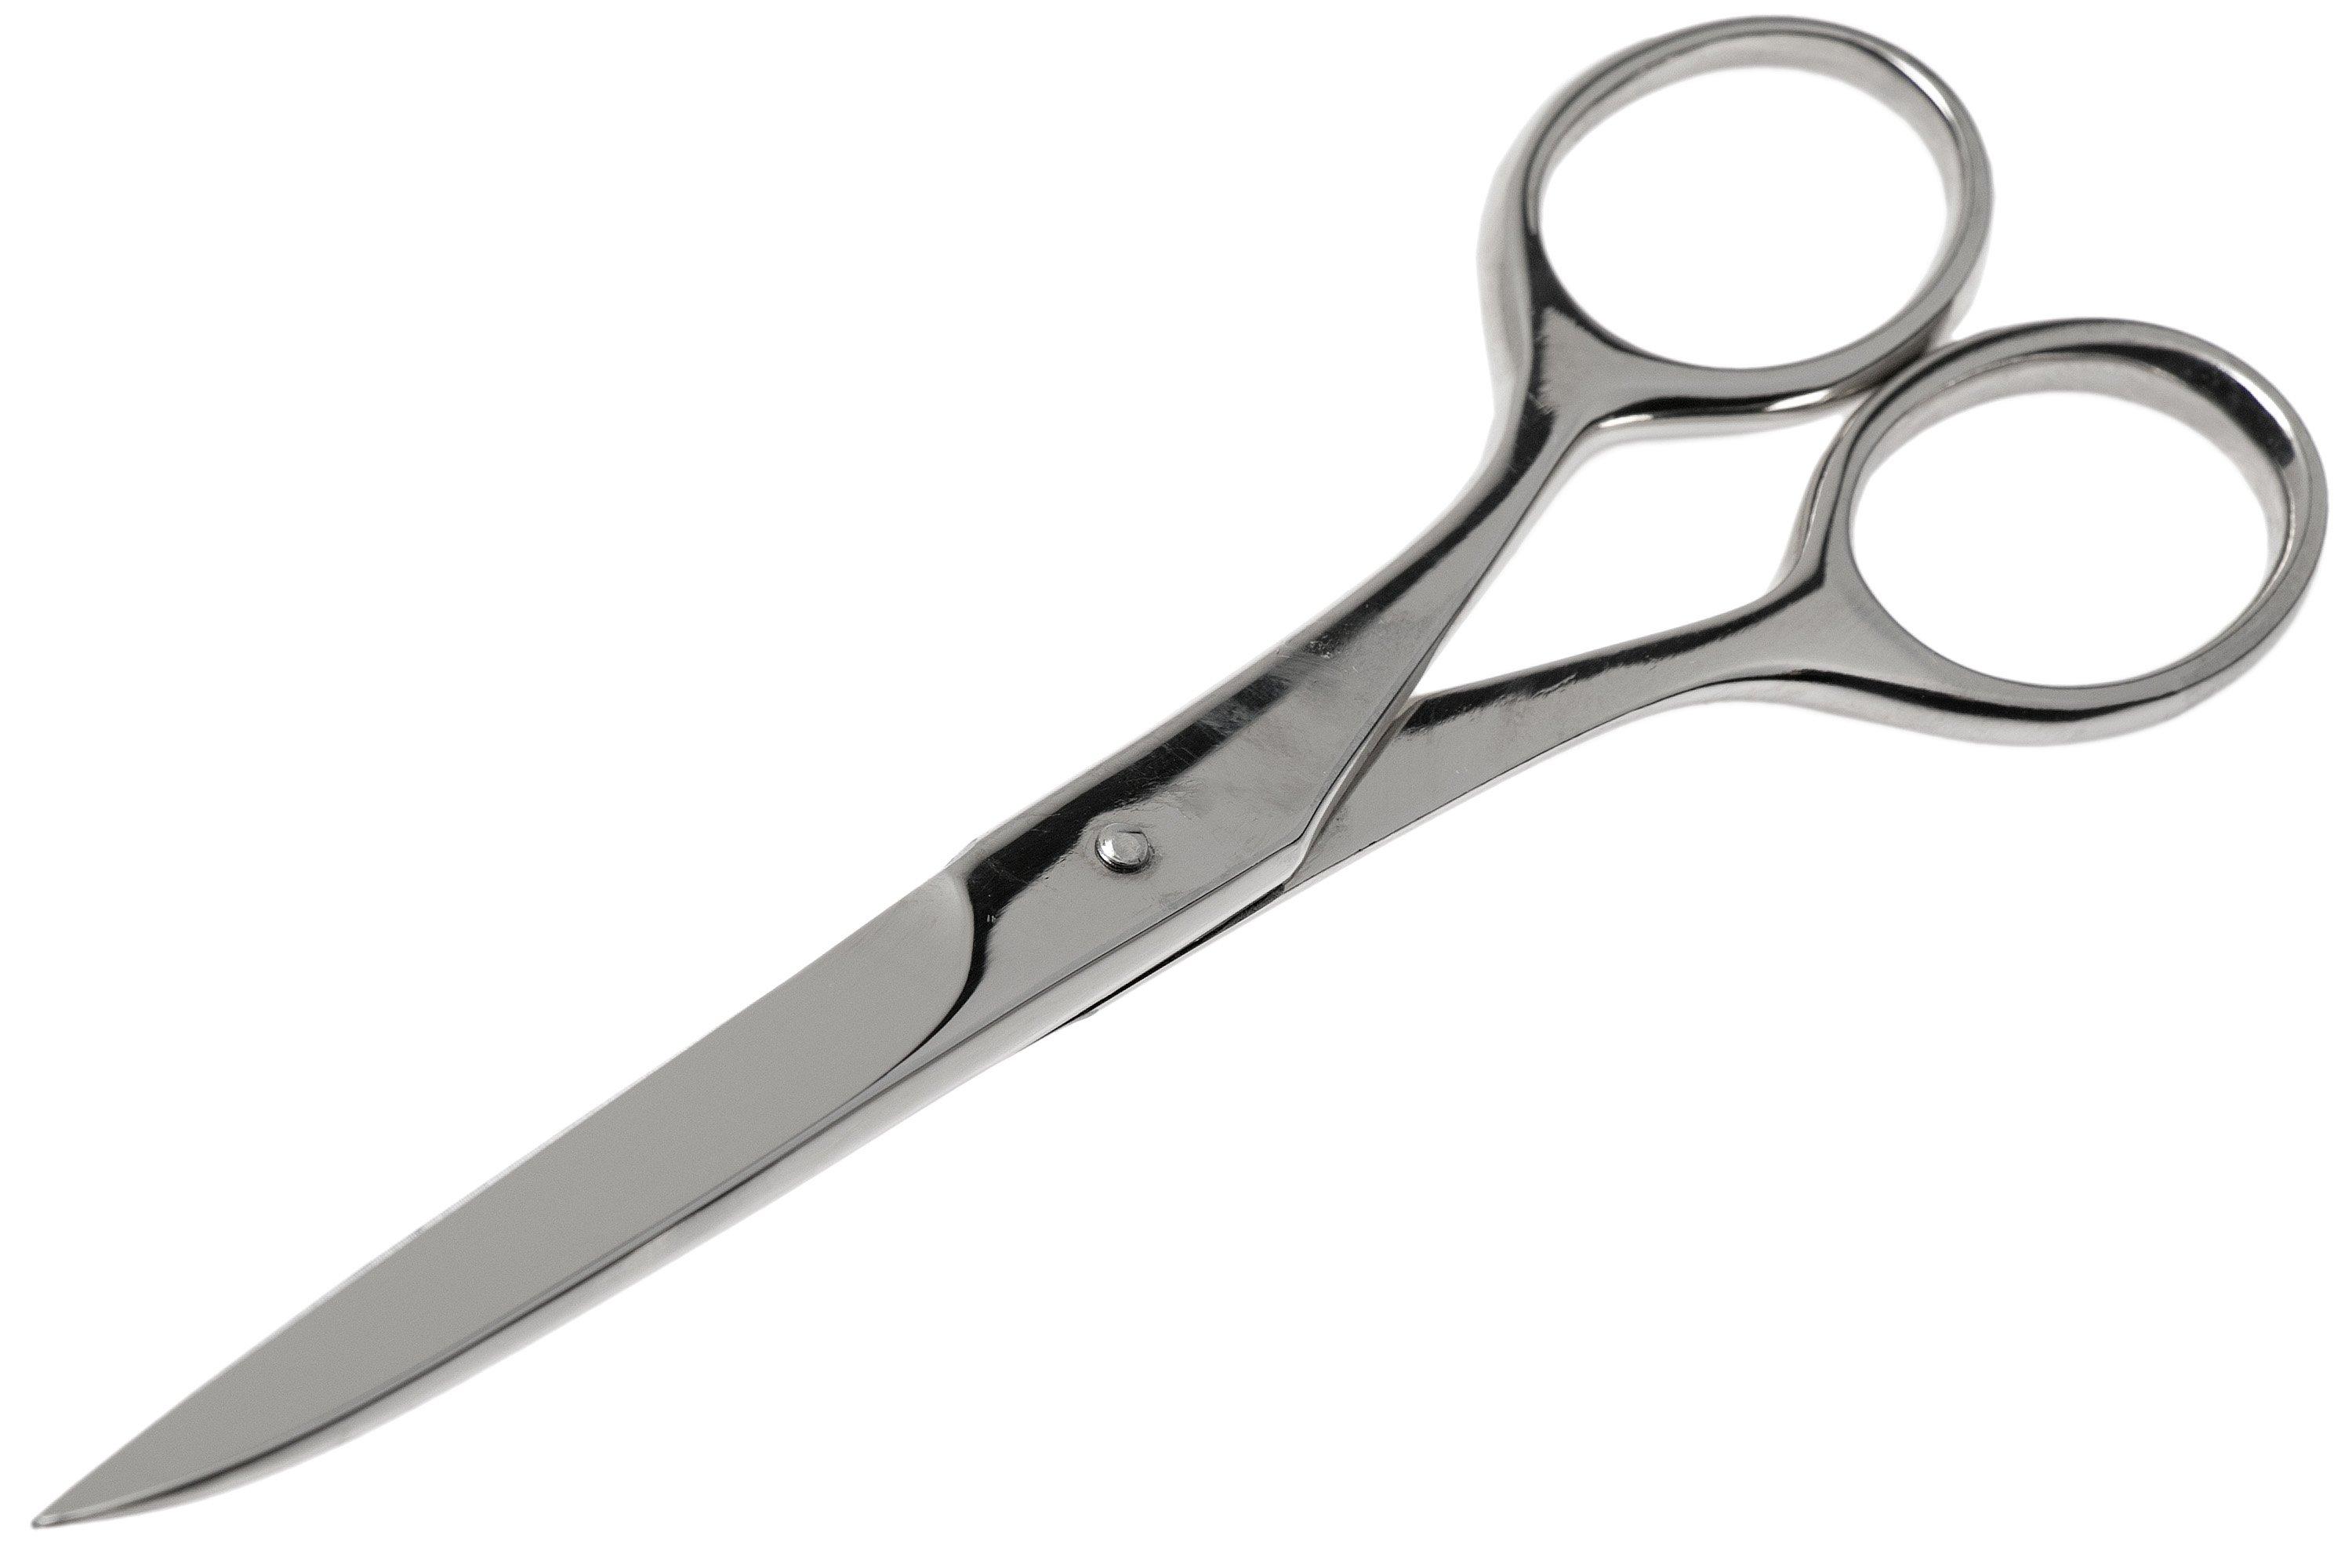 Victorinox Sweden 8.1016.15, 15 cm household scissors | Advantageously  shopping at